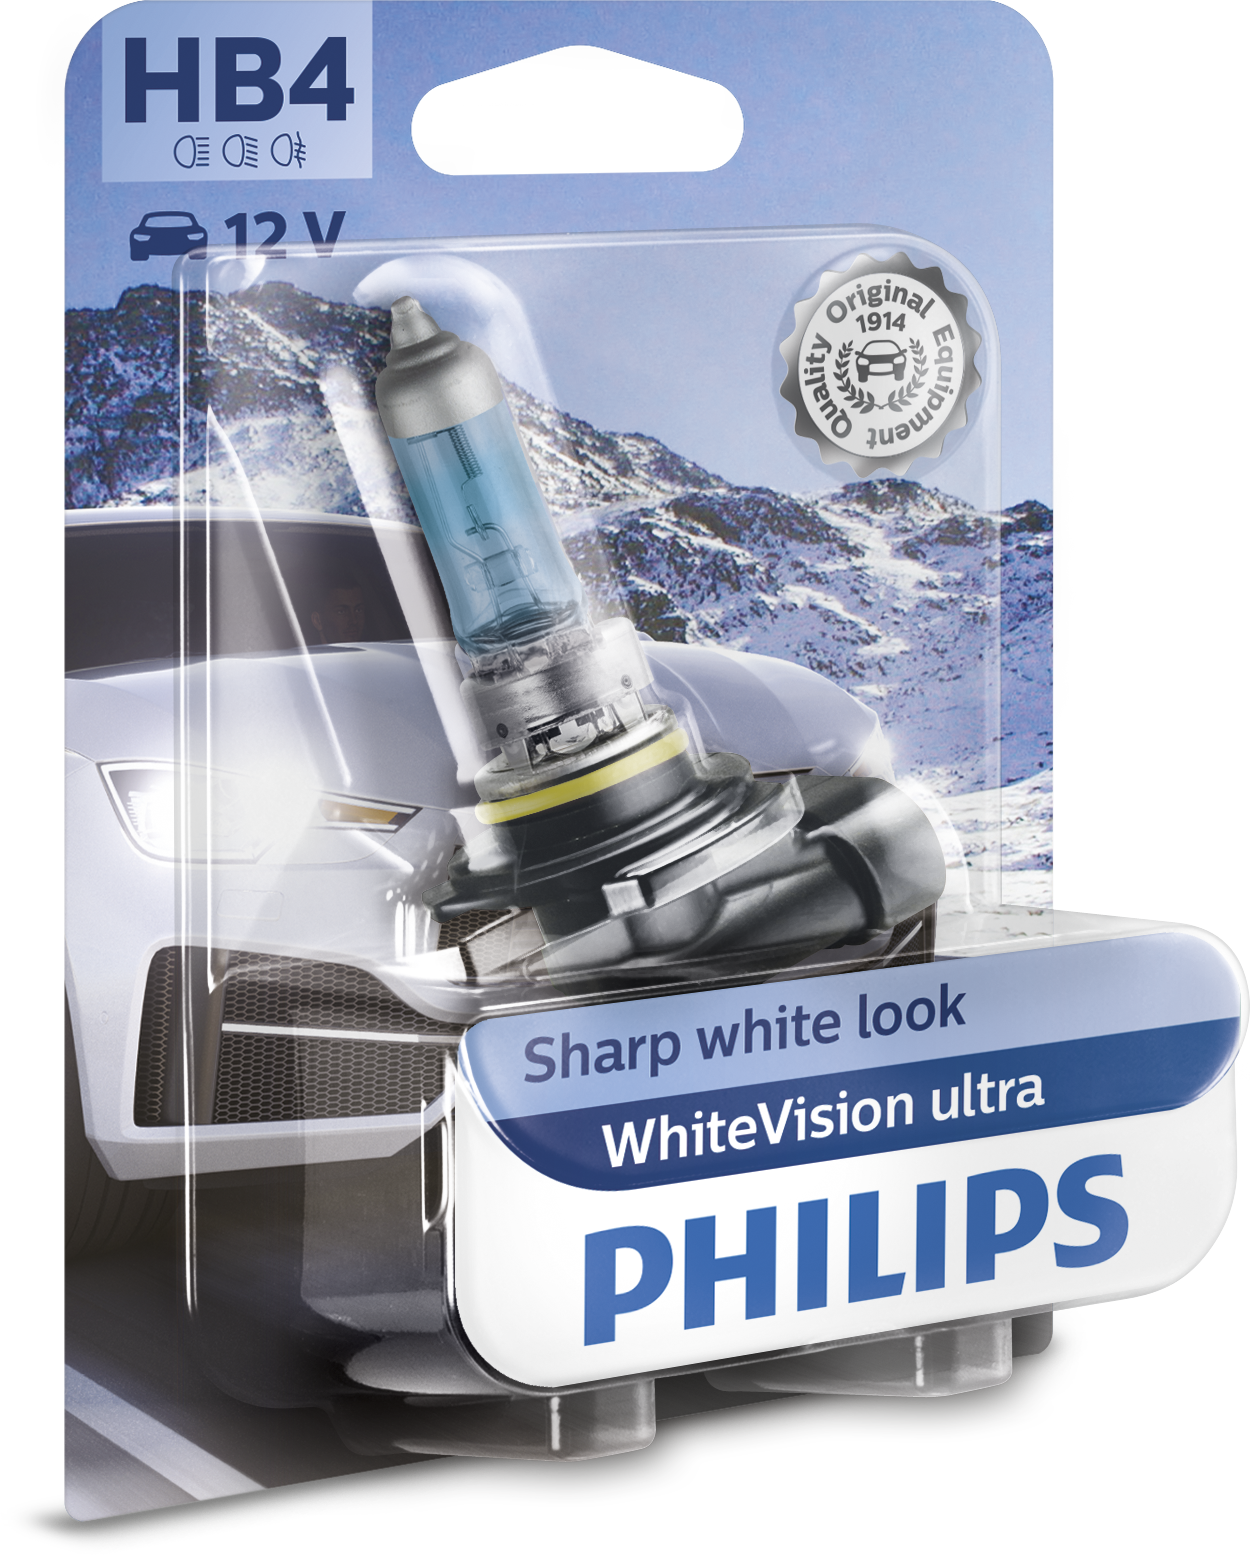 HB4 WhiteVision ultra 9006WVUB1